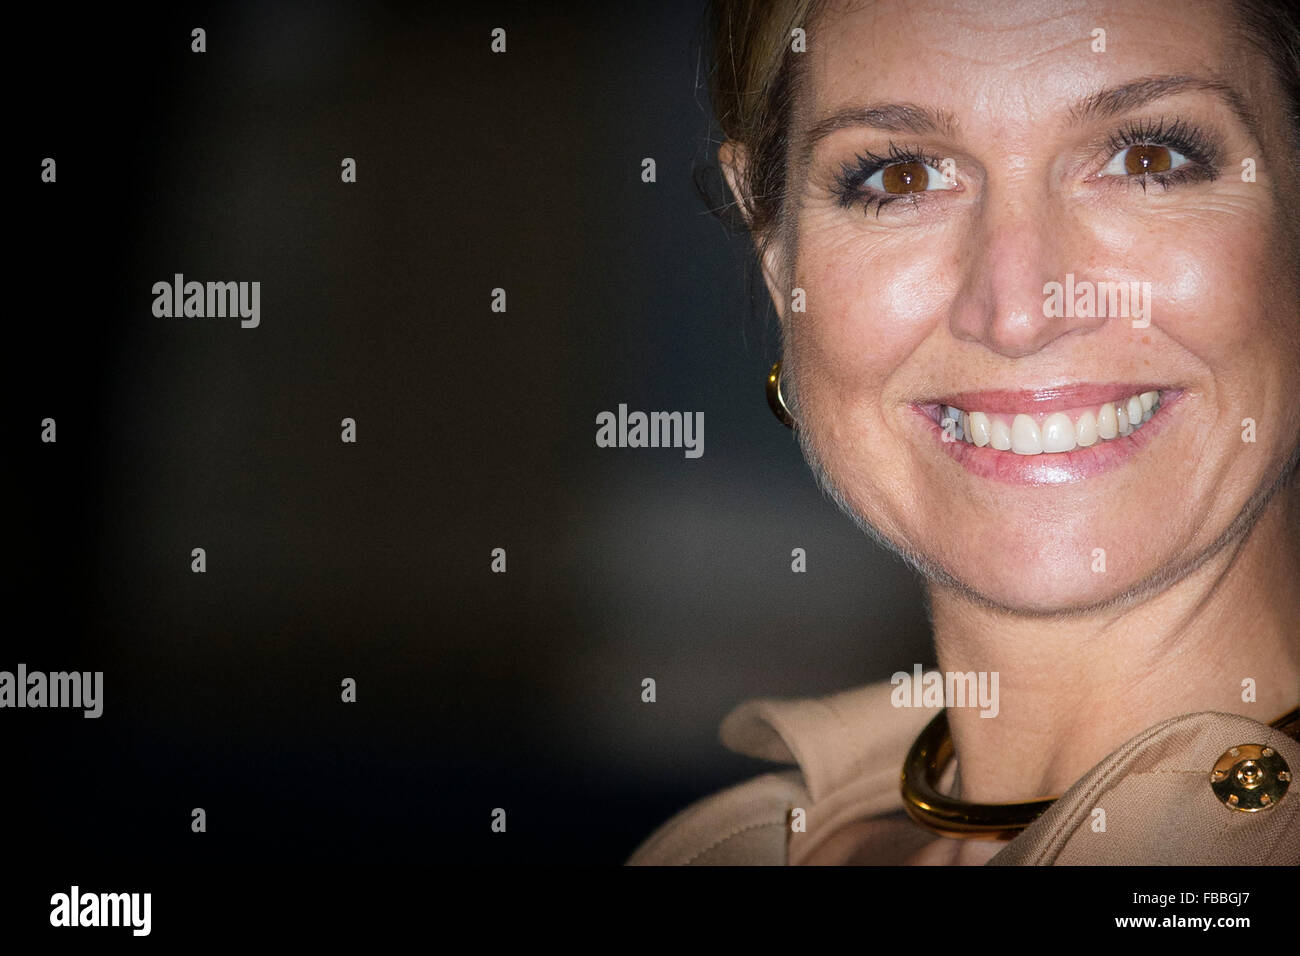 Queen Maxima attend the launch of platform NLGroeit a program to increase growth of potential entrepreneurs at the Van Nelle Fabriek in Rotterdam, The Netherlands, 13 January 2016. Photo: Patrick van Katwijk / NETHERLANDS OUT POINT DE VUE OUT - NO WIRE SERVICE - Stock Photo